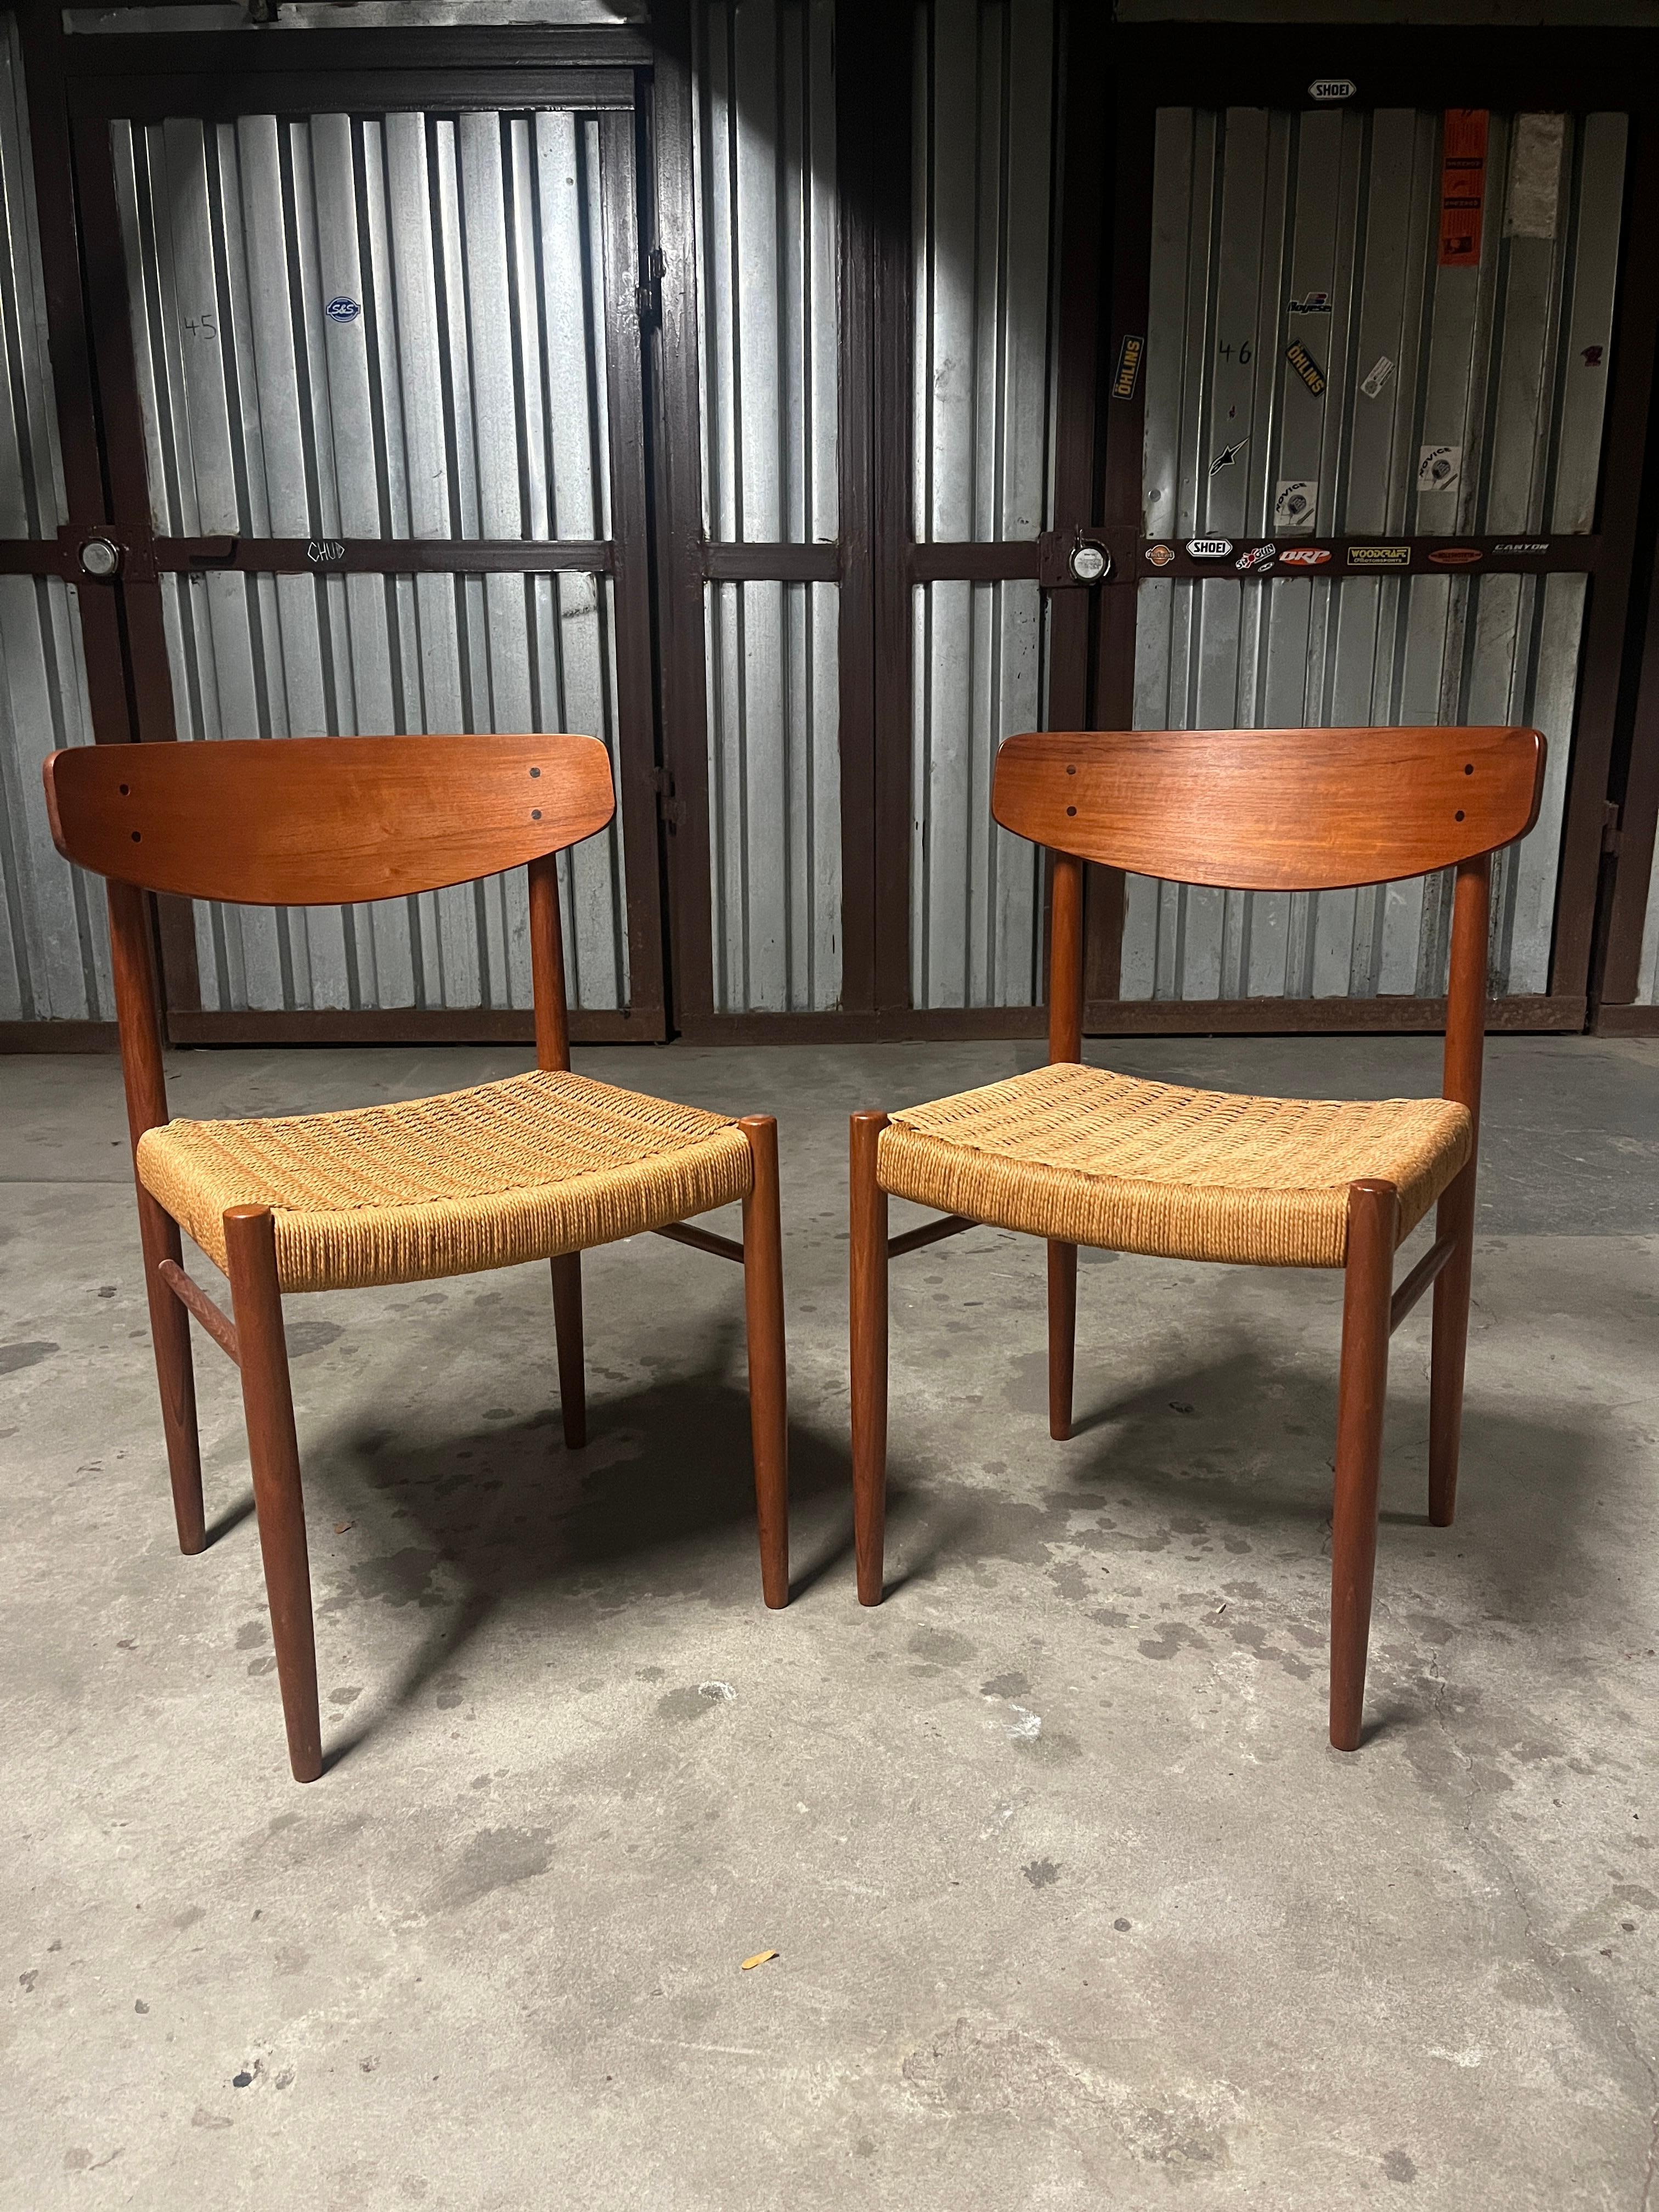 A.M. Møbler pair of teak and paper cord side chairs (model 501) 1960s. These beautiful Danish chairs were lightly used in a home where they shared the dining table with 4 other different chairs (pictured and also for sale). This is one beautiful